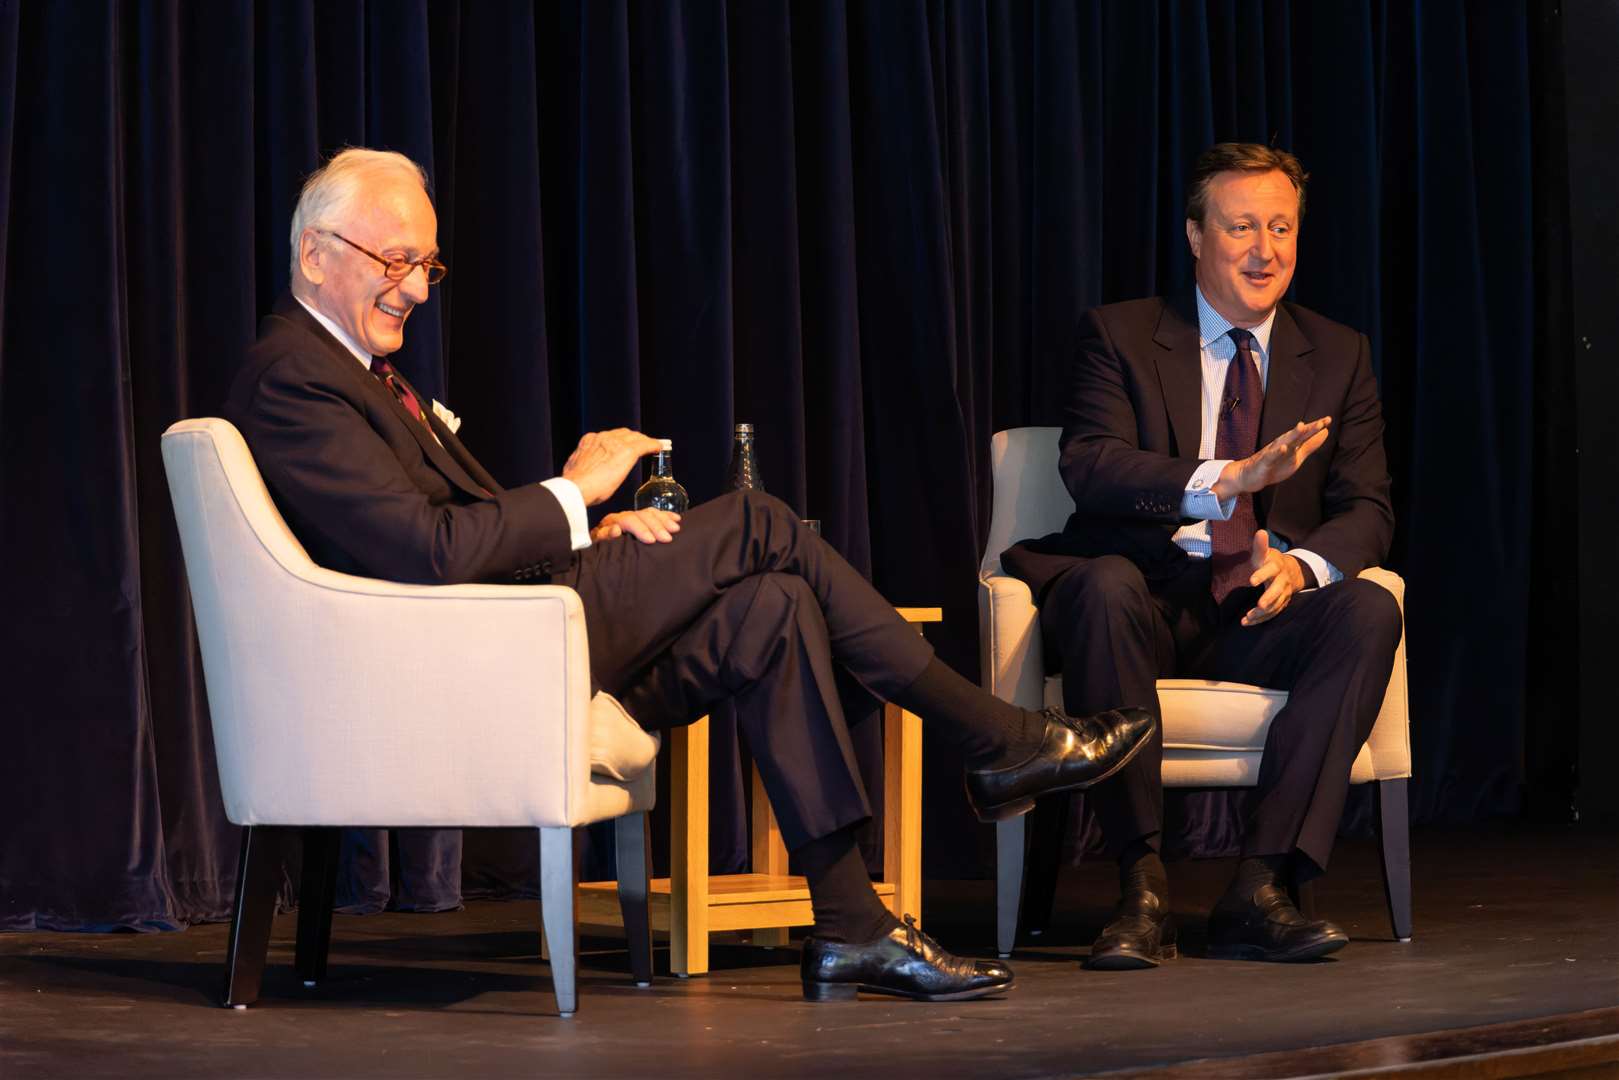 David Cameron took part in a Q&A session with pupils and staff